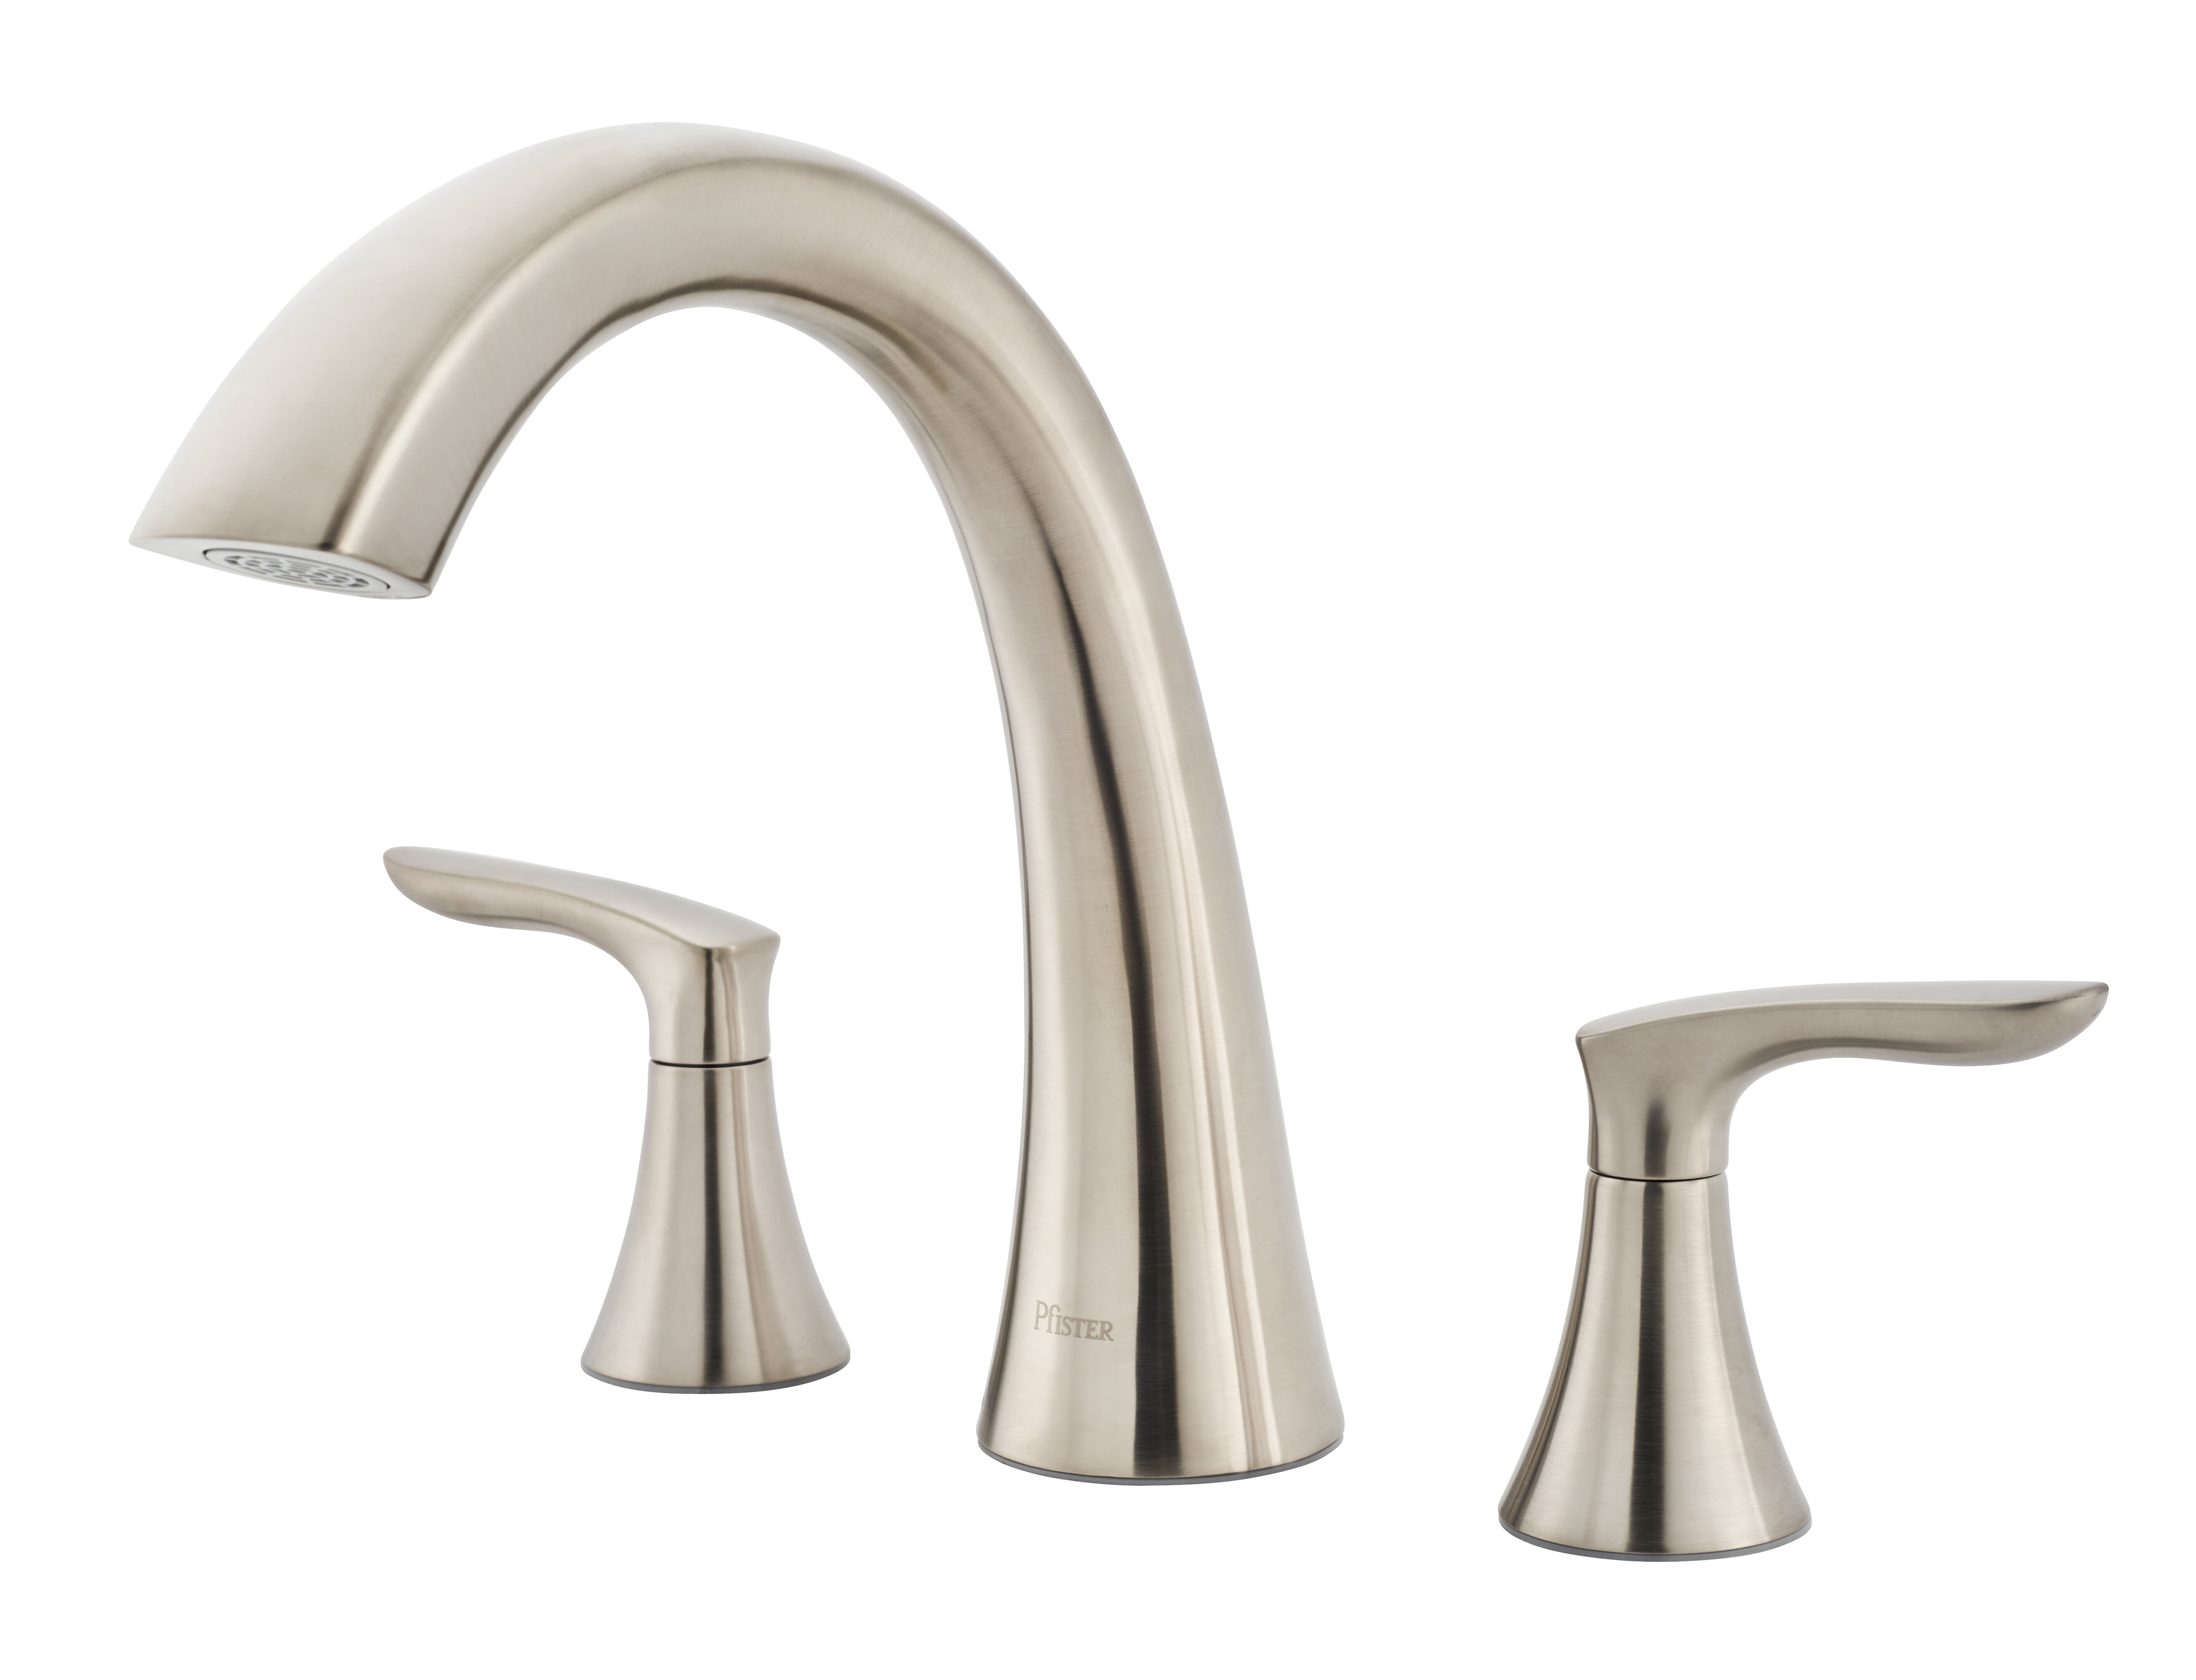 Pfister Weller Double Handle Deck Mounted Roman Tub Faucet